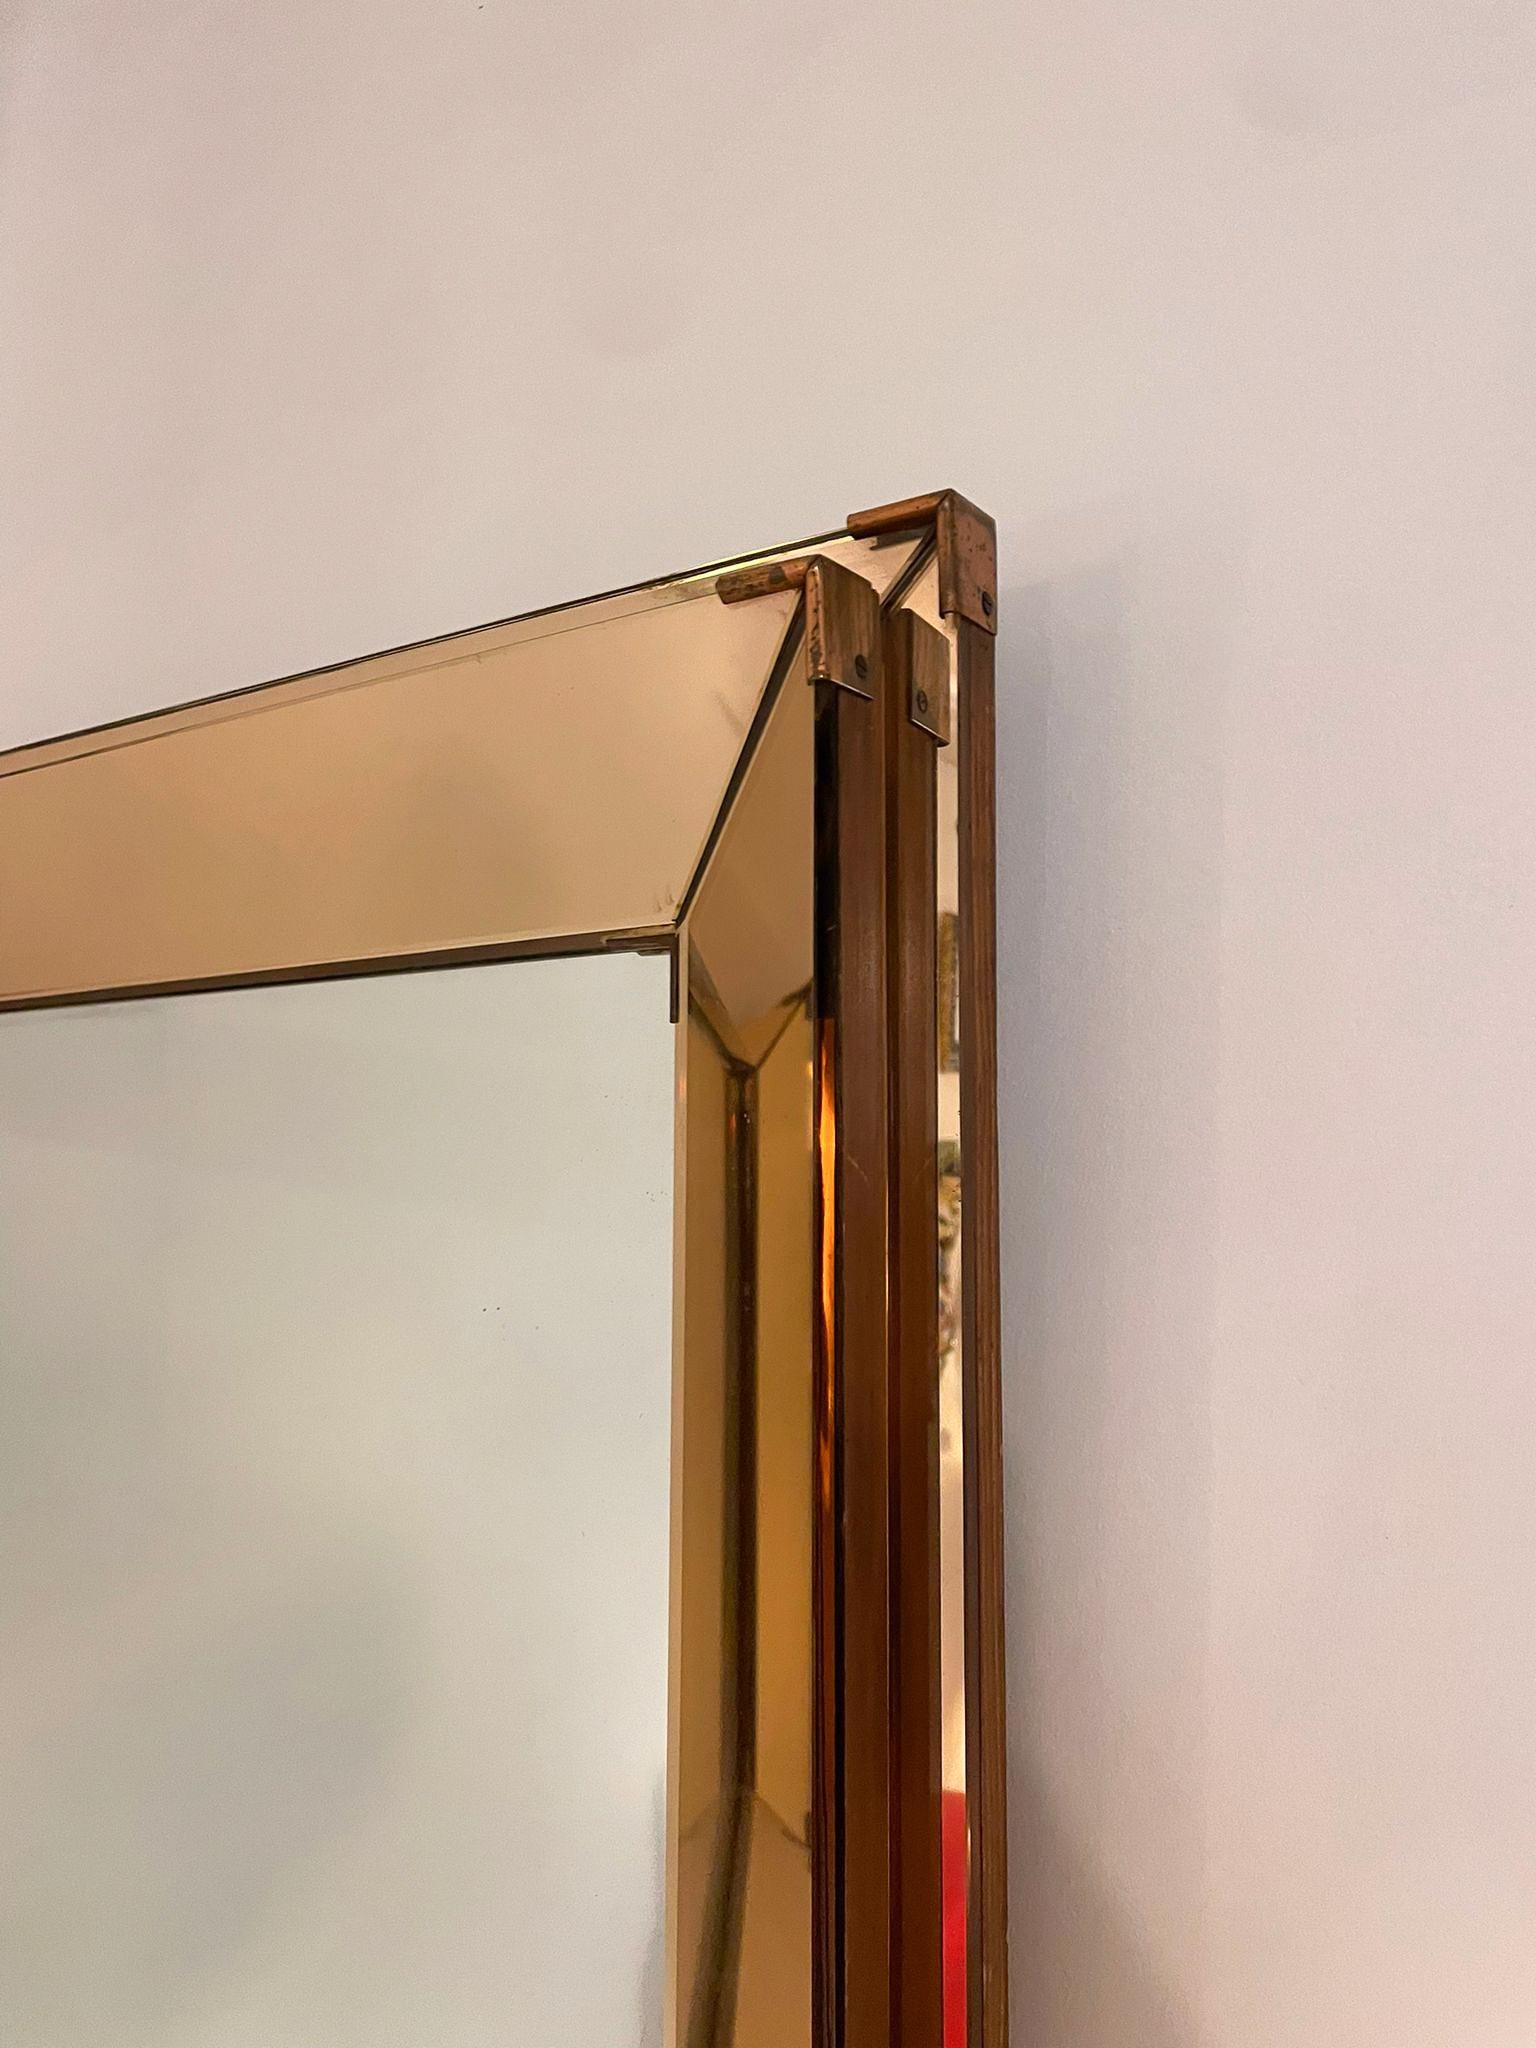 Copper Mid-Century Modern Mirror in the style of Jacques Adnet, 1940s For Sale